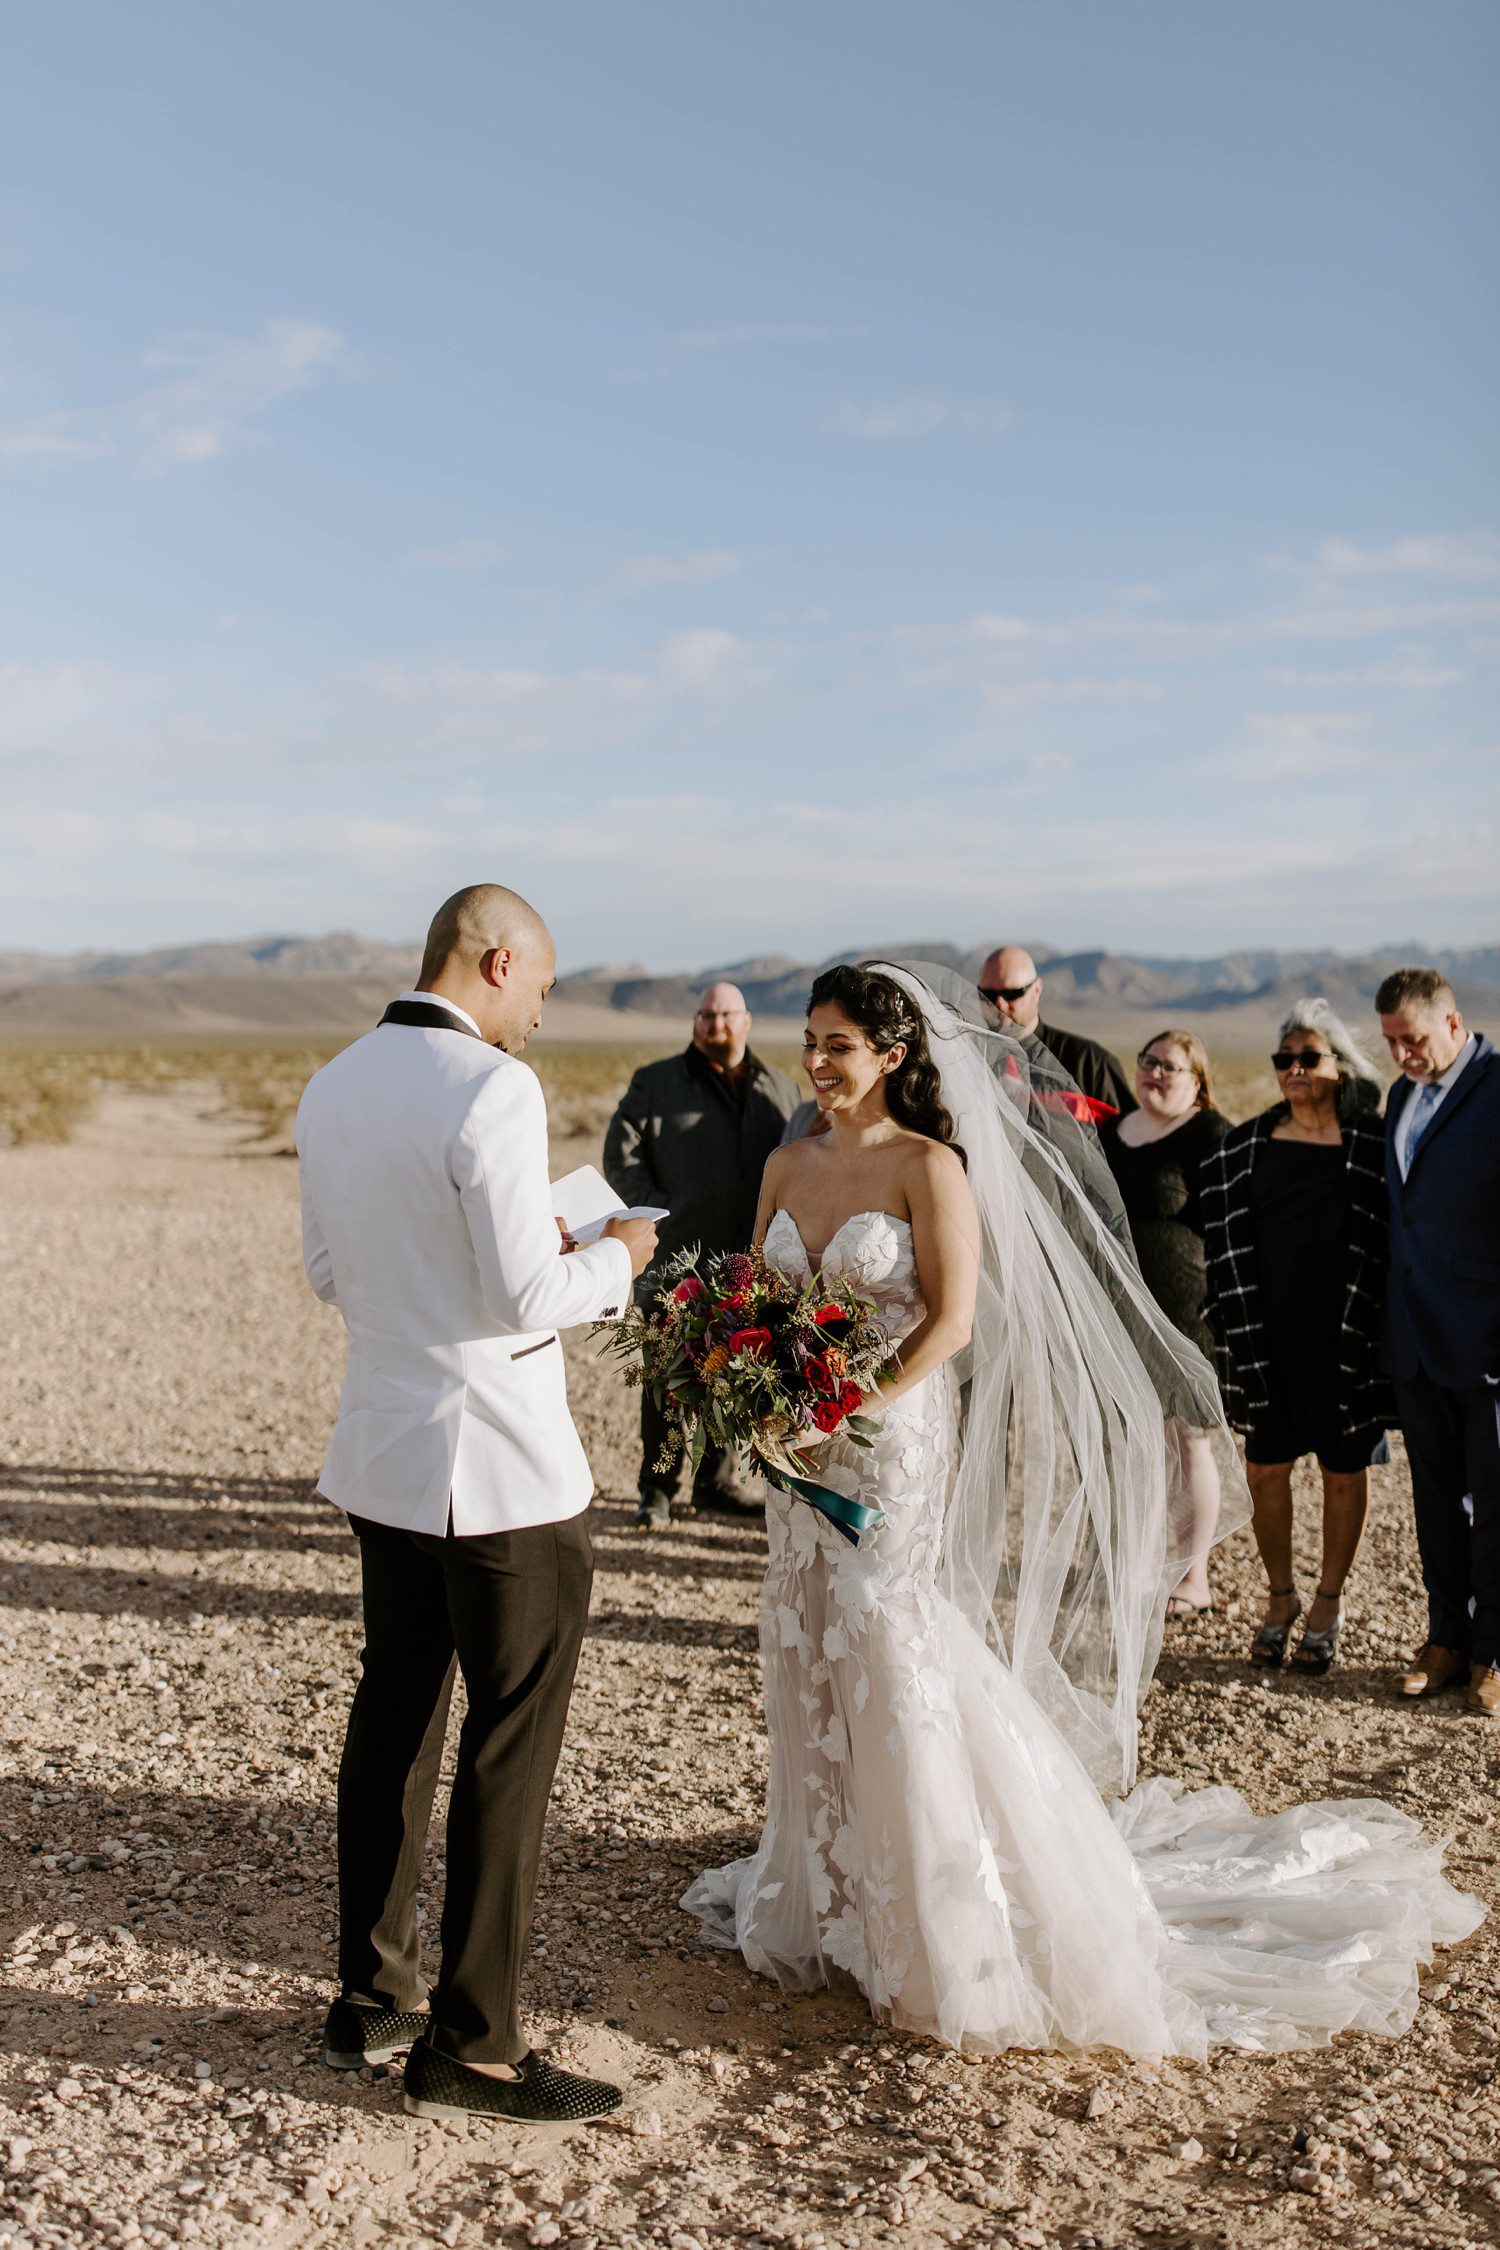 Wedding Ceremony at Seven Magic Mountains